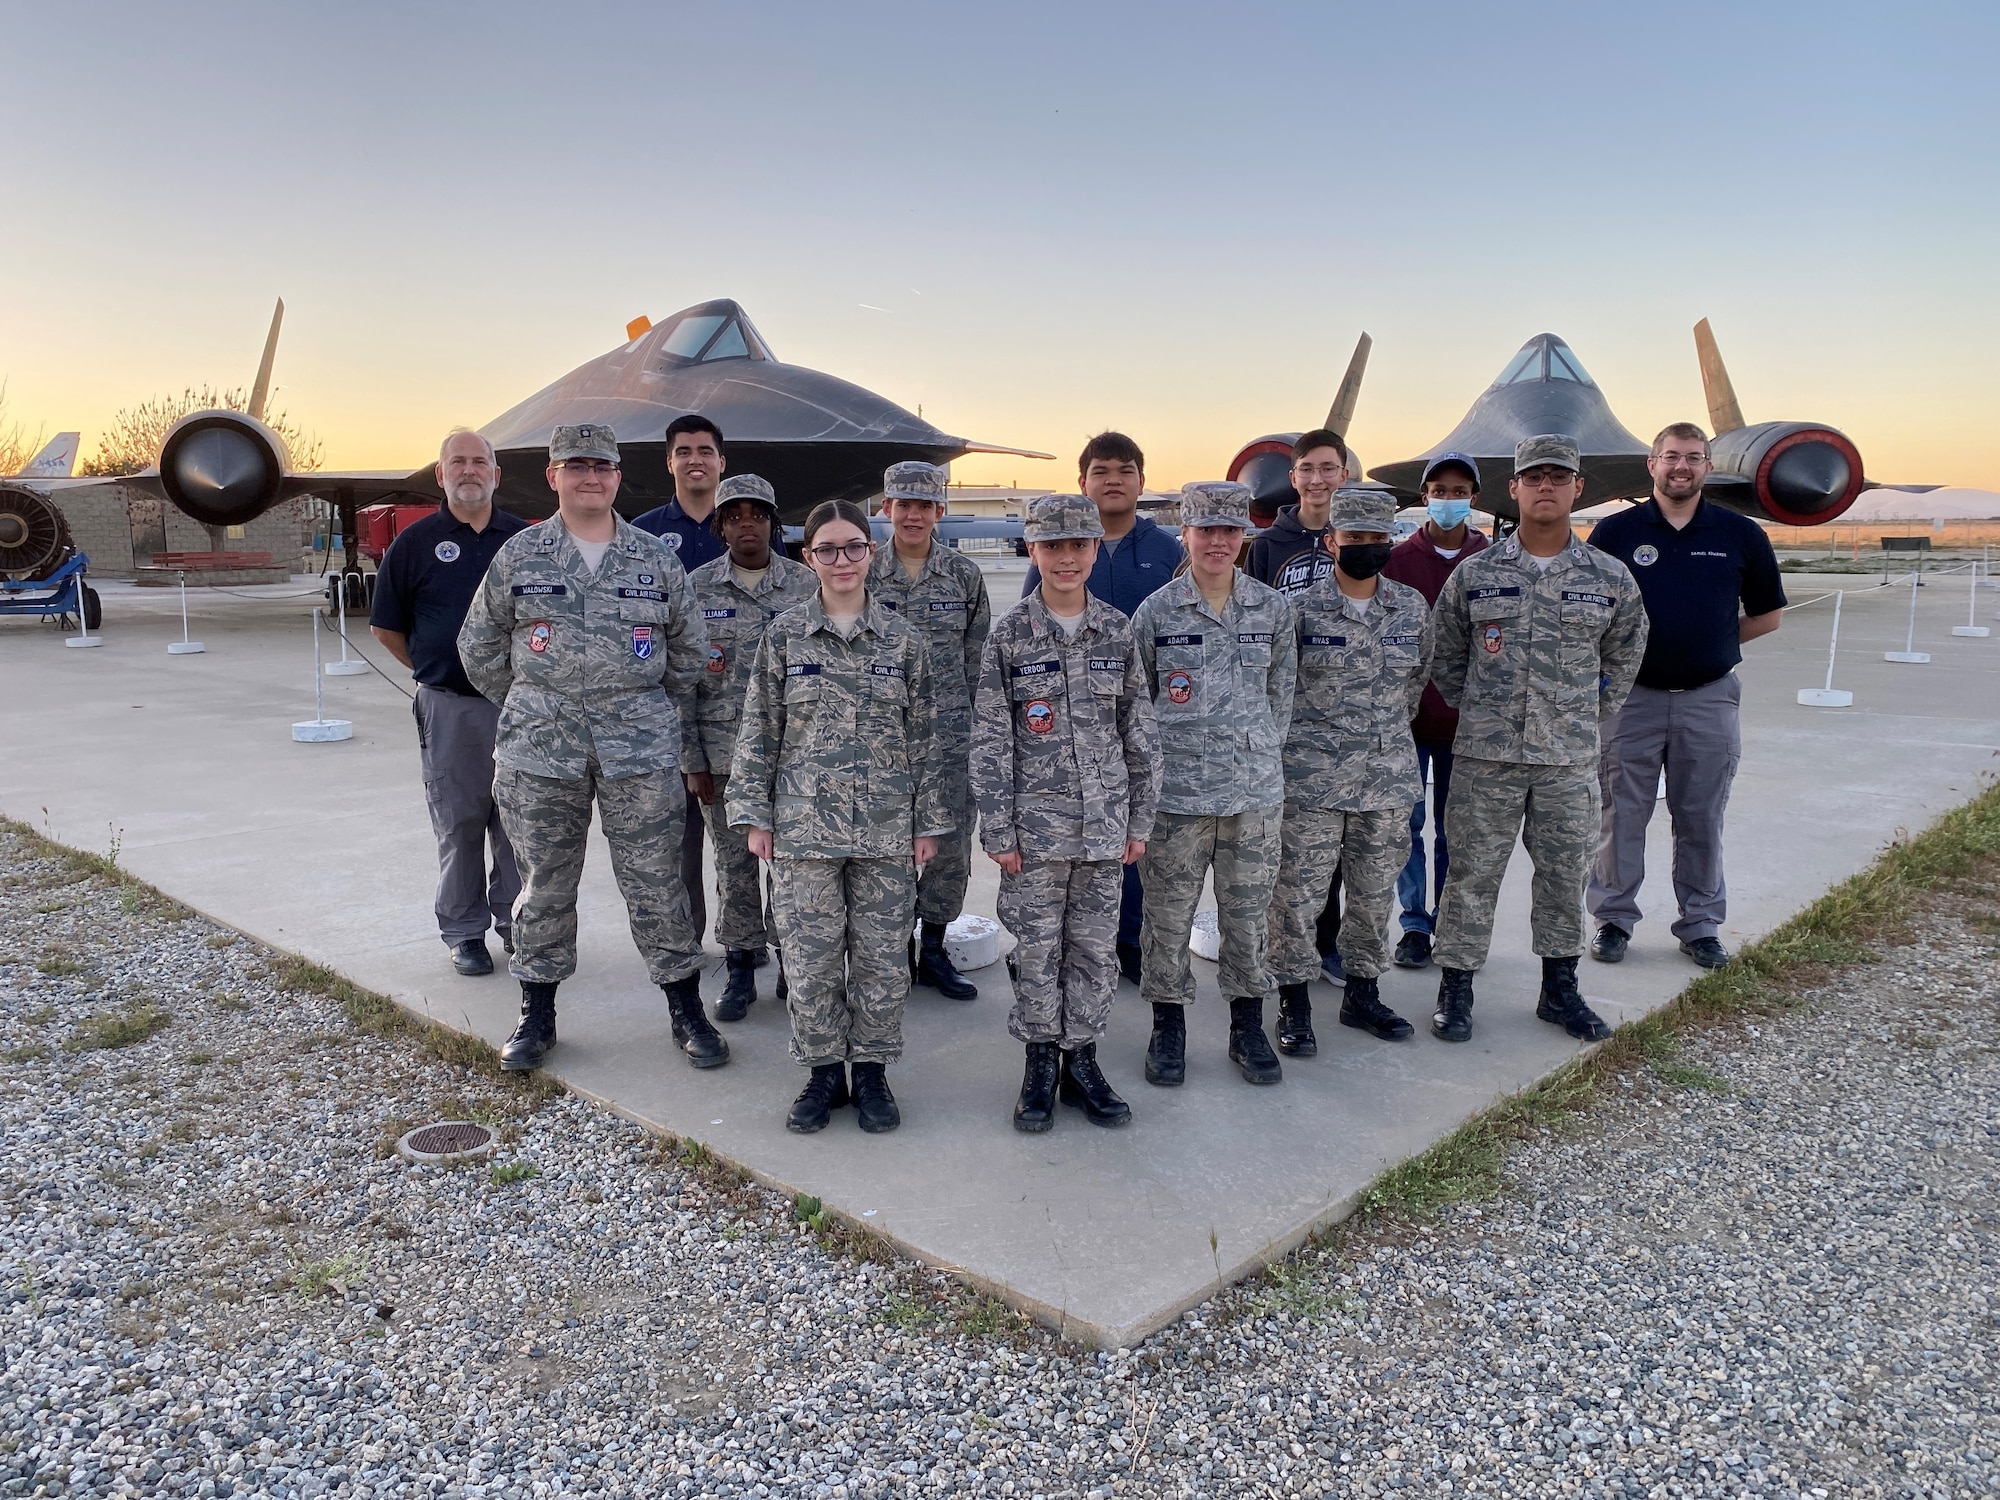 Leaders from Plant 42, Edwards Air Force Base’s 412th Test Wing and members of the Civil Air Patrol’s Pancho Barnes Composite Squadron 49 came together at Blackbird Airpark to establish a new detachment flight.